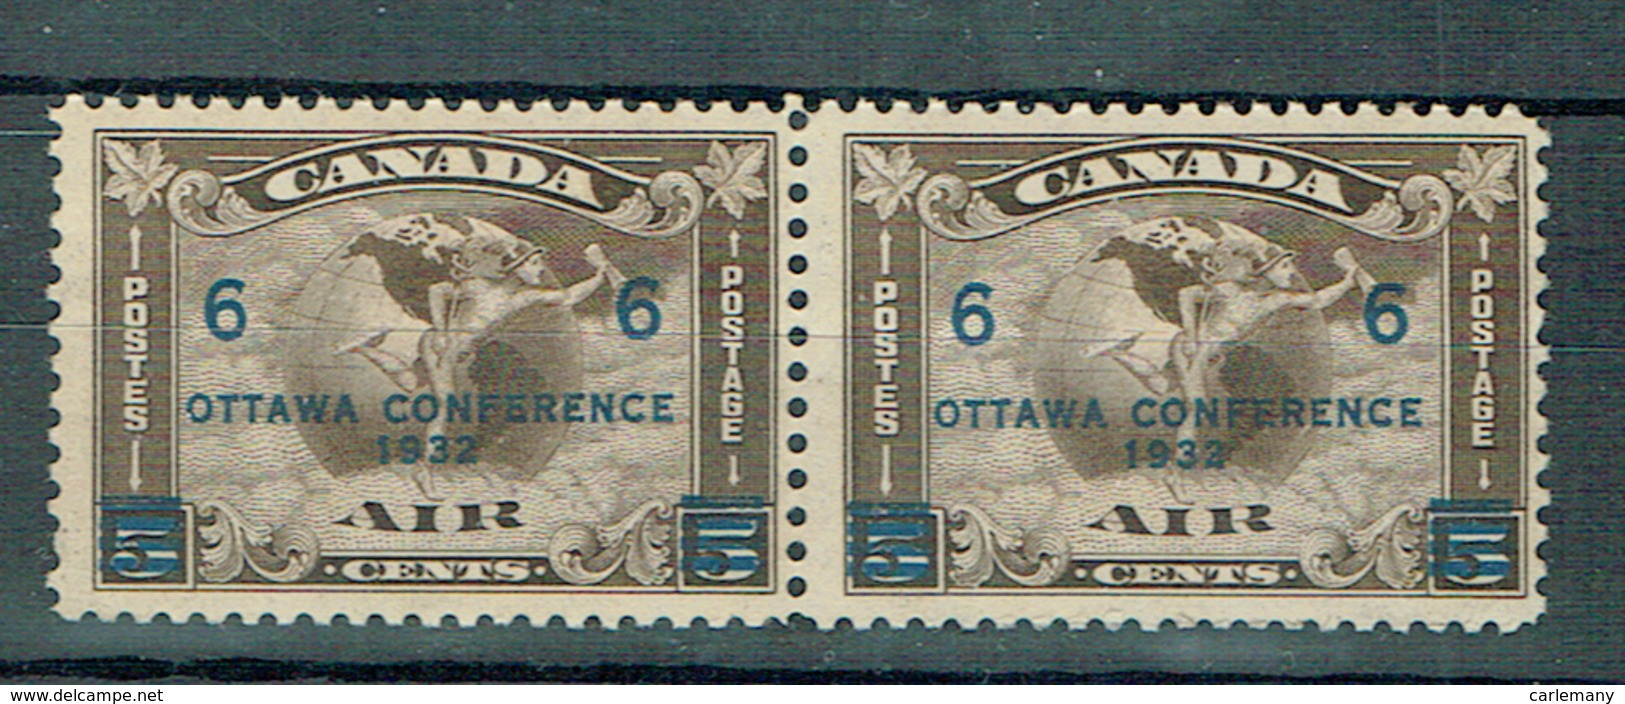 TIMBRES CANADA STAMPS MI 170 CONFERENCE OTTAWA 1932 PAIR TIMBRES  SG 318 - Unused Stamps